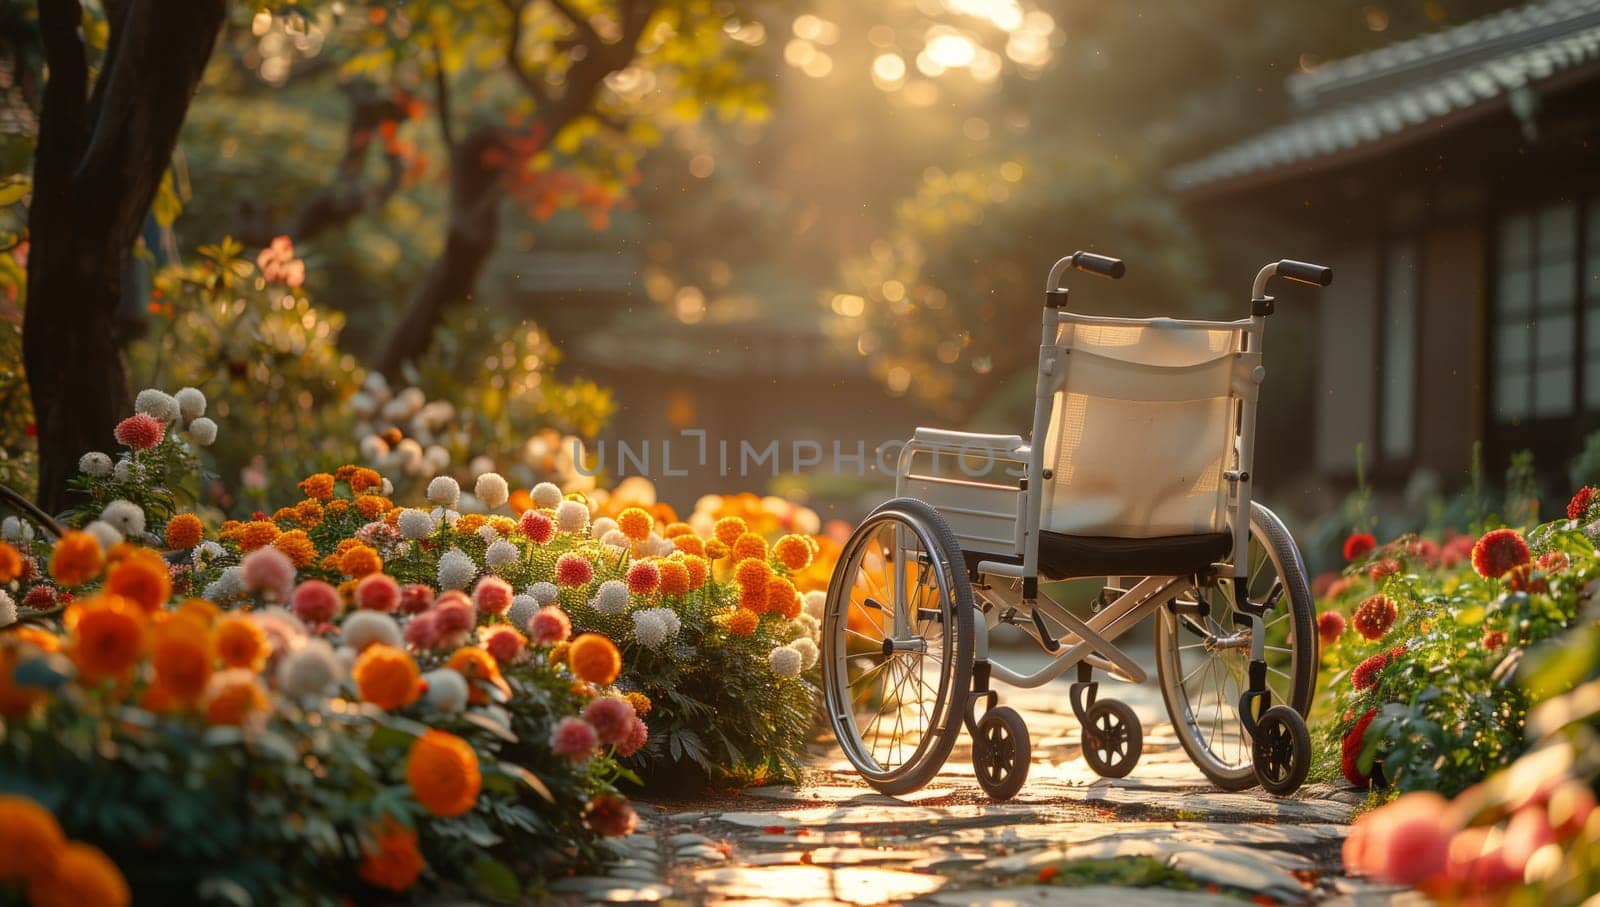 A wheelchair is parked amidst a colorful array of flowers in a garden, creating a beautiful and serene scene in nature